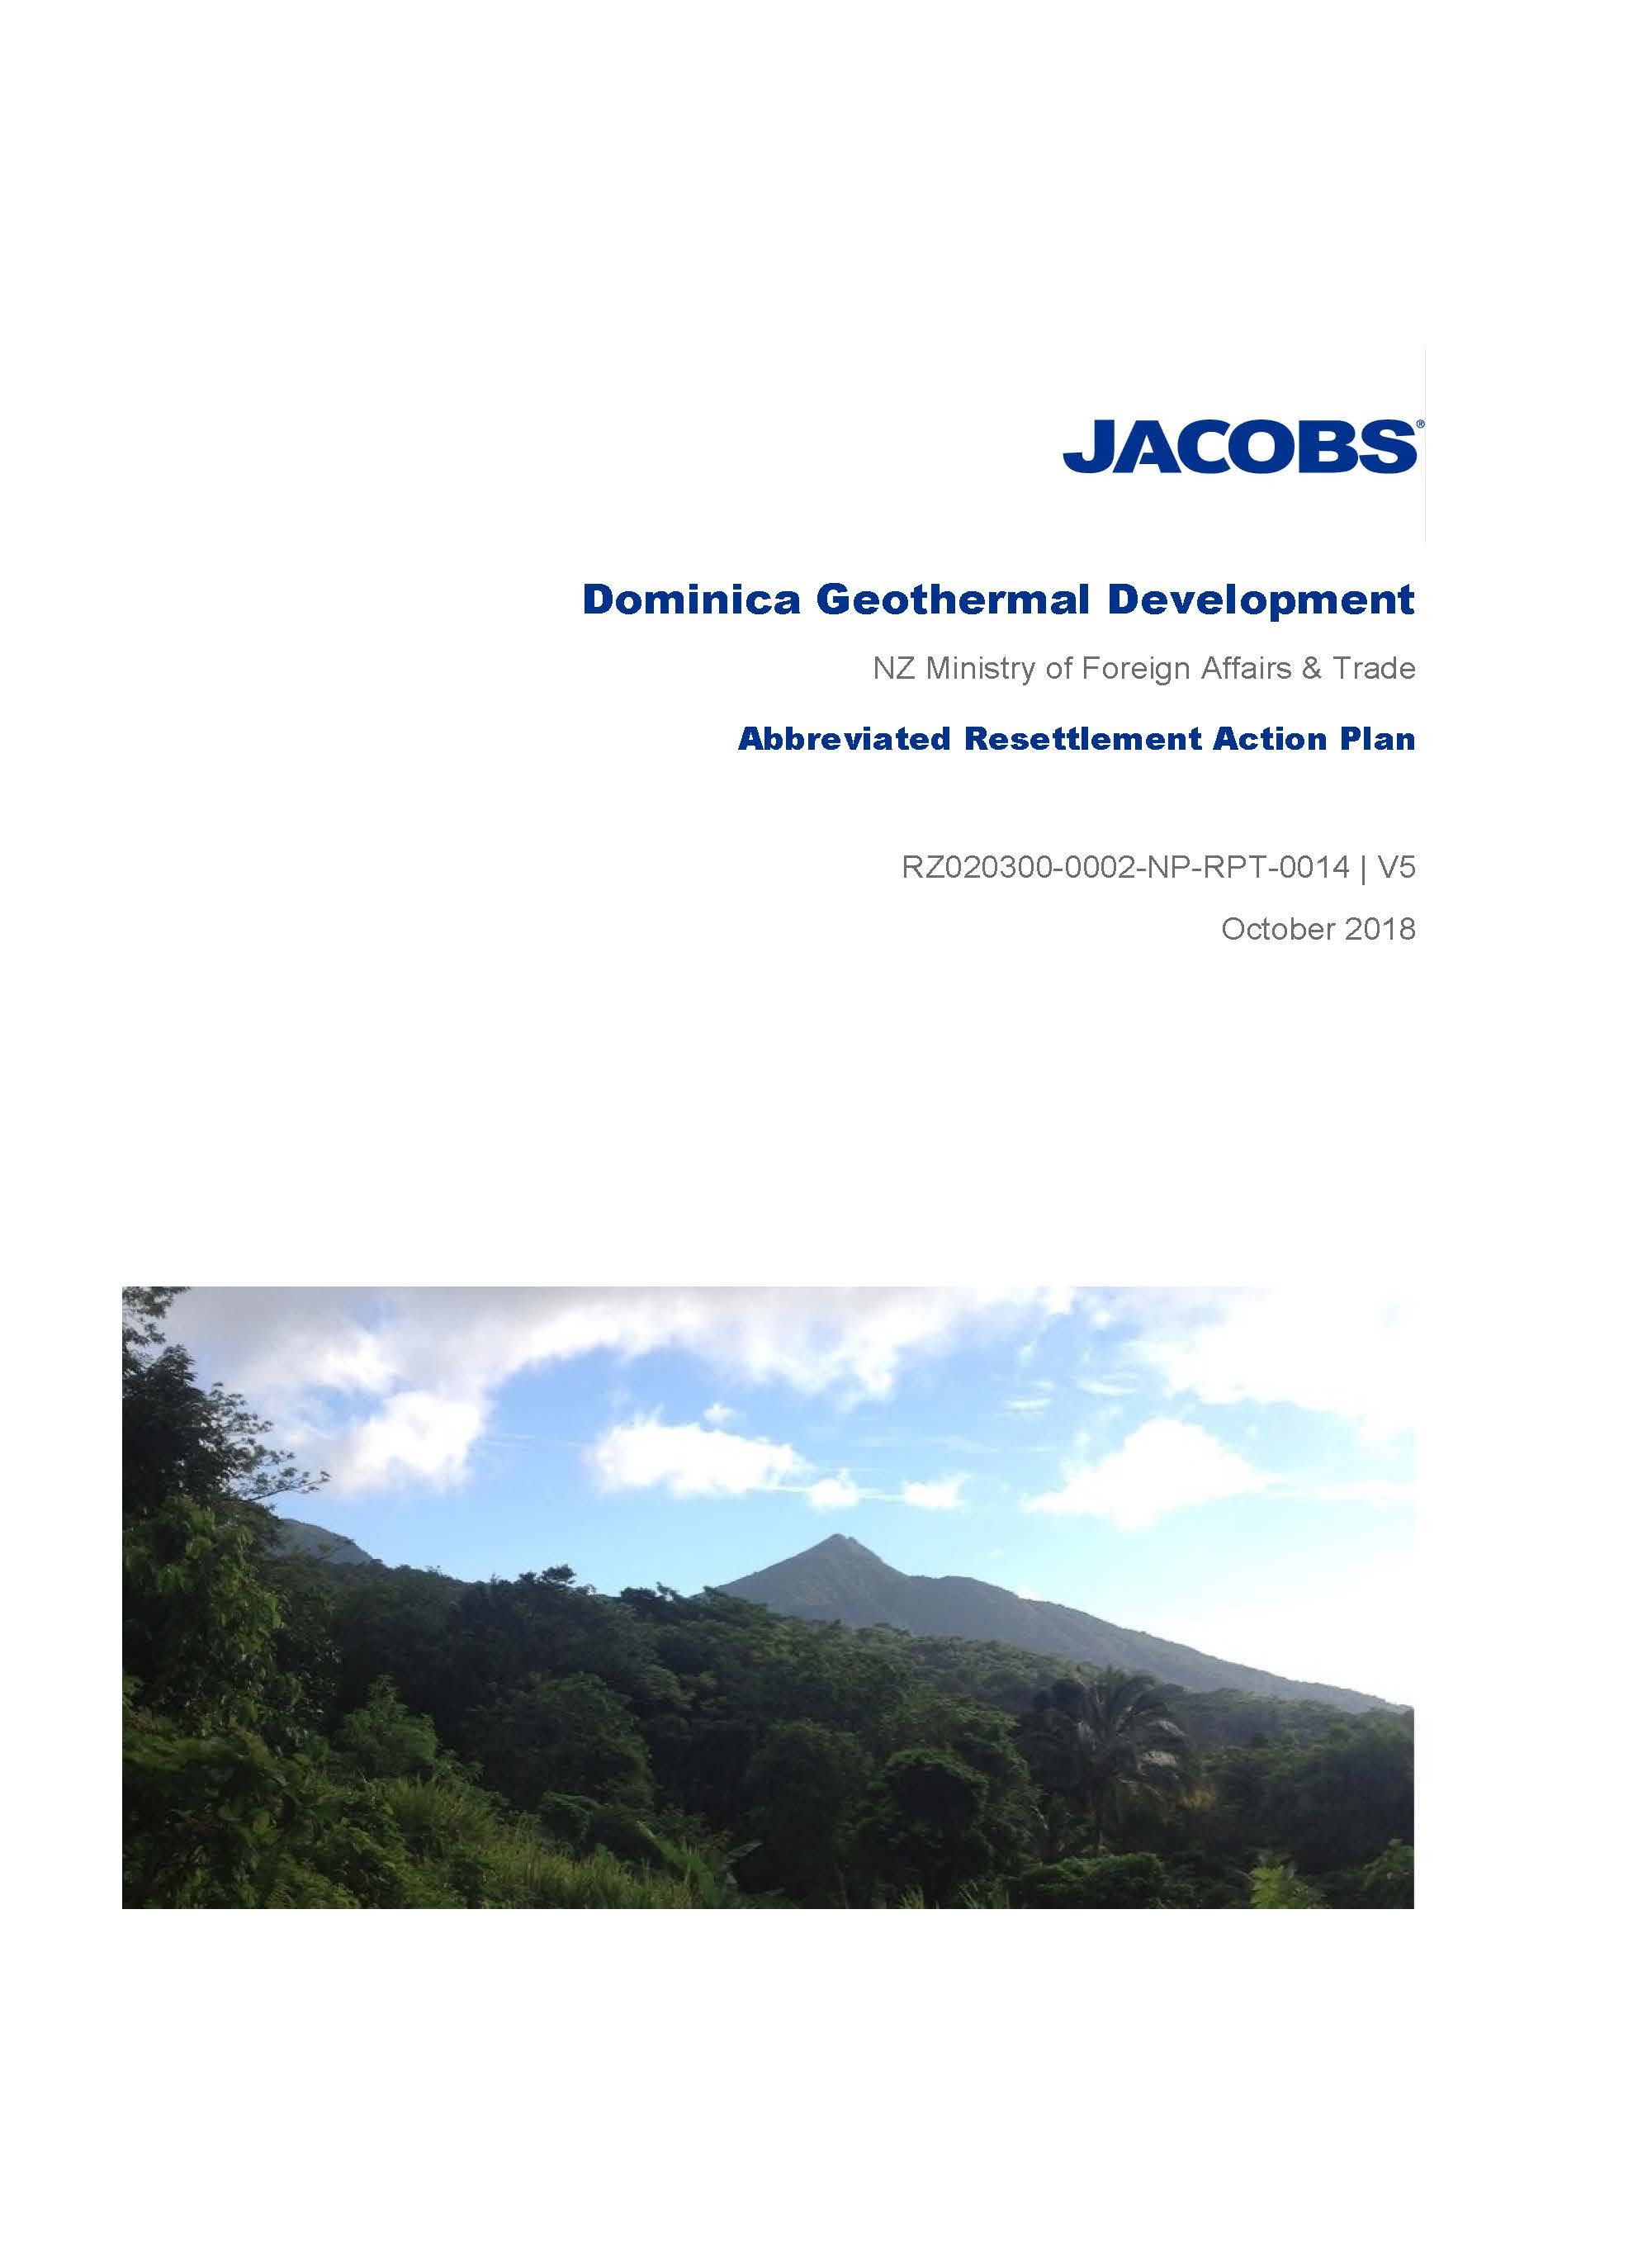 text-based cover featuring document title against a white backdrop with landscape photo of hill in Dominica at the bottom